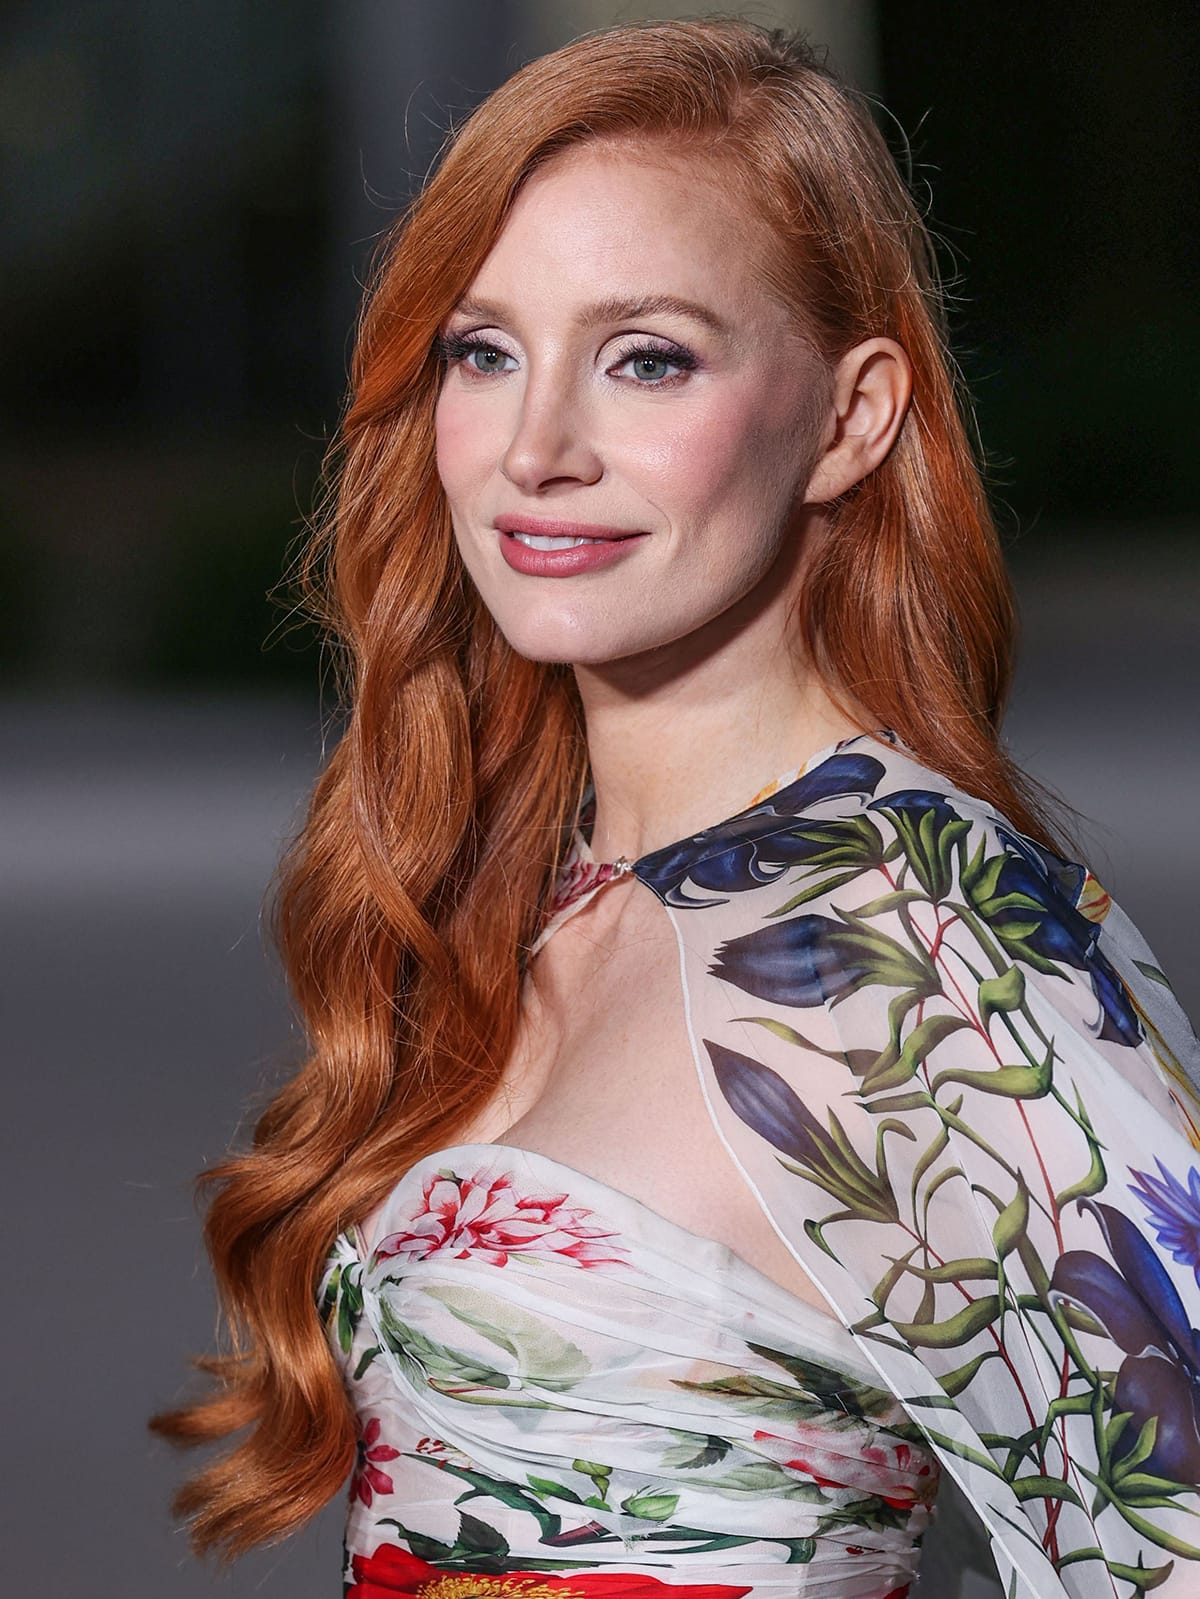 Jessica Chastain wears a full face of makeup and styles her auburn tresses in Old Hollywood waves